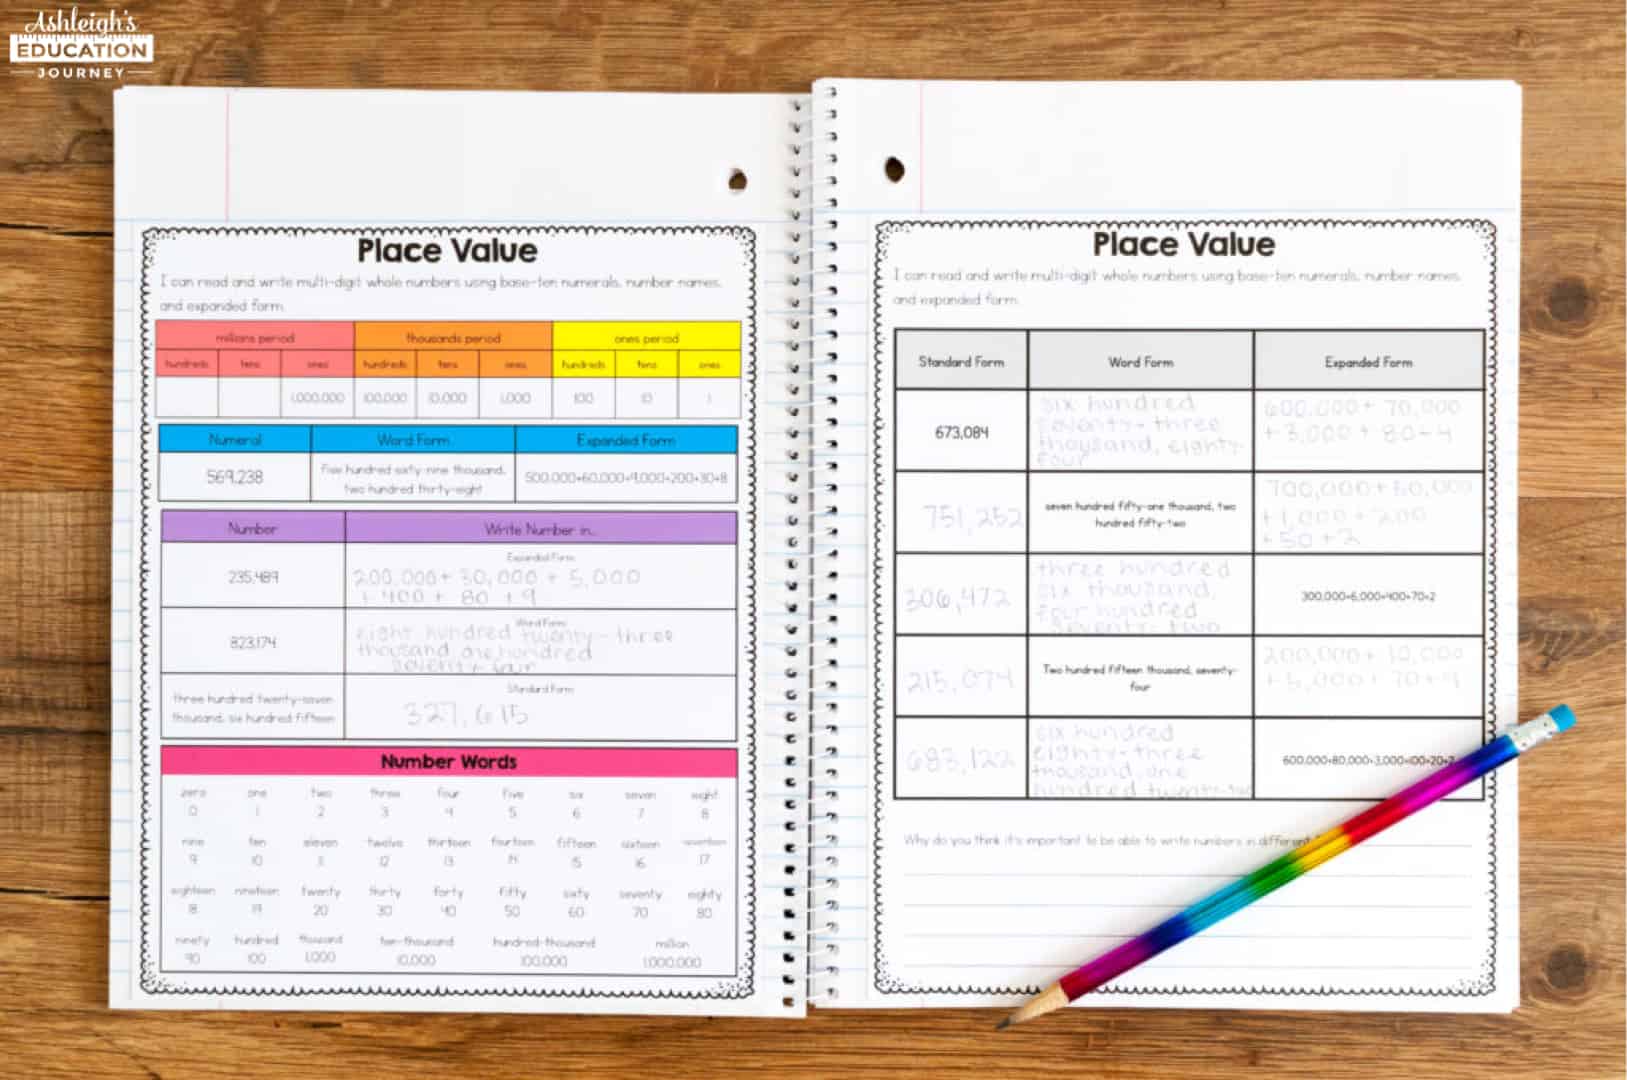 Place value worksheets inside a notebook beside a pencil on a wood table